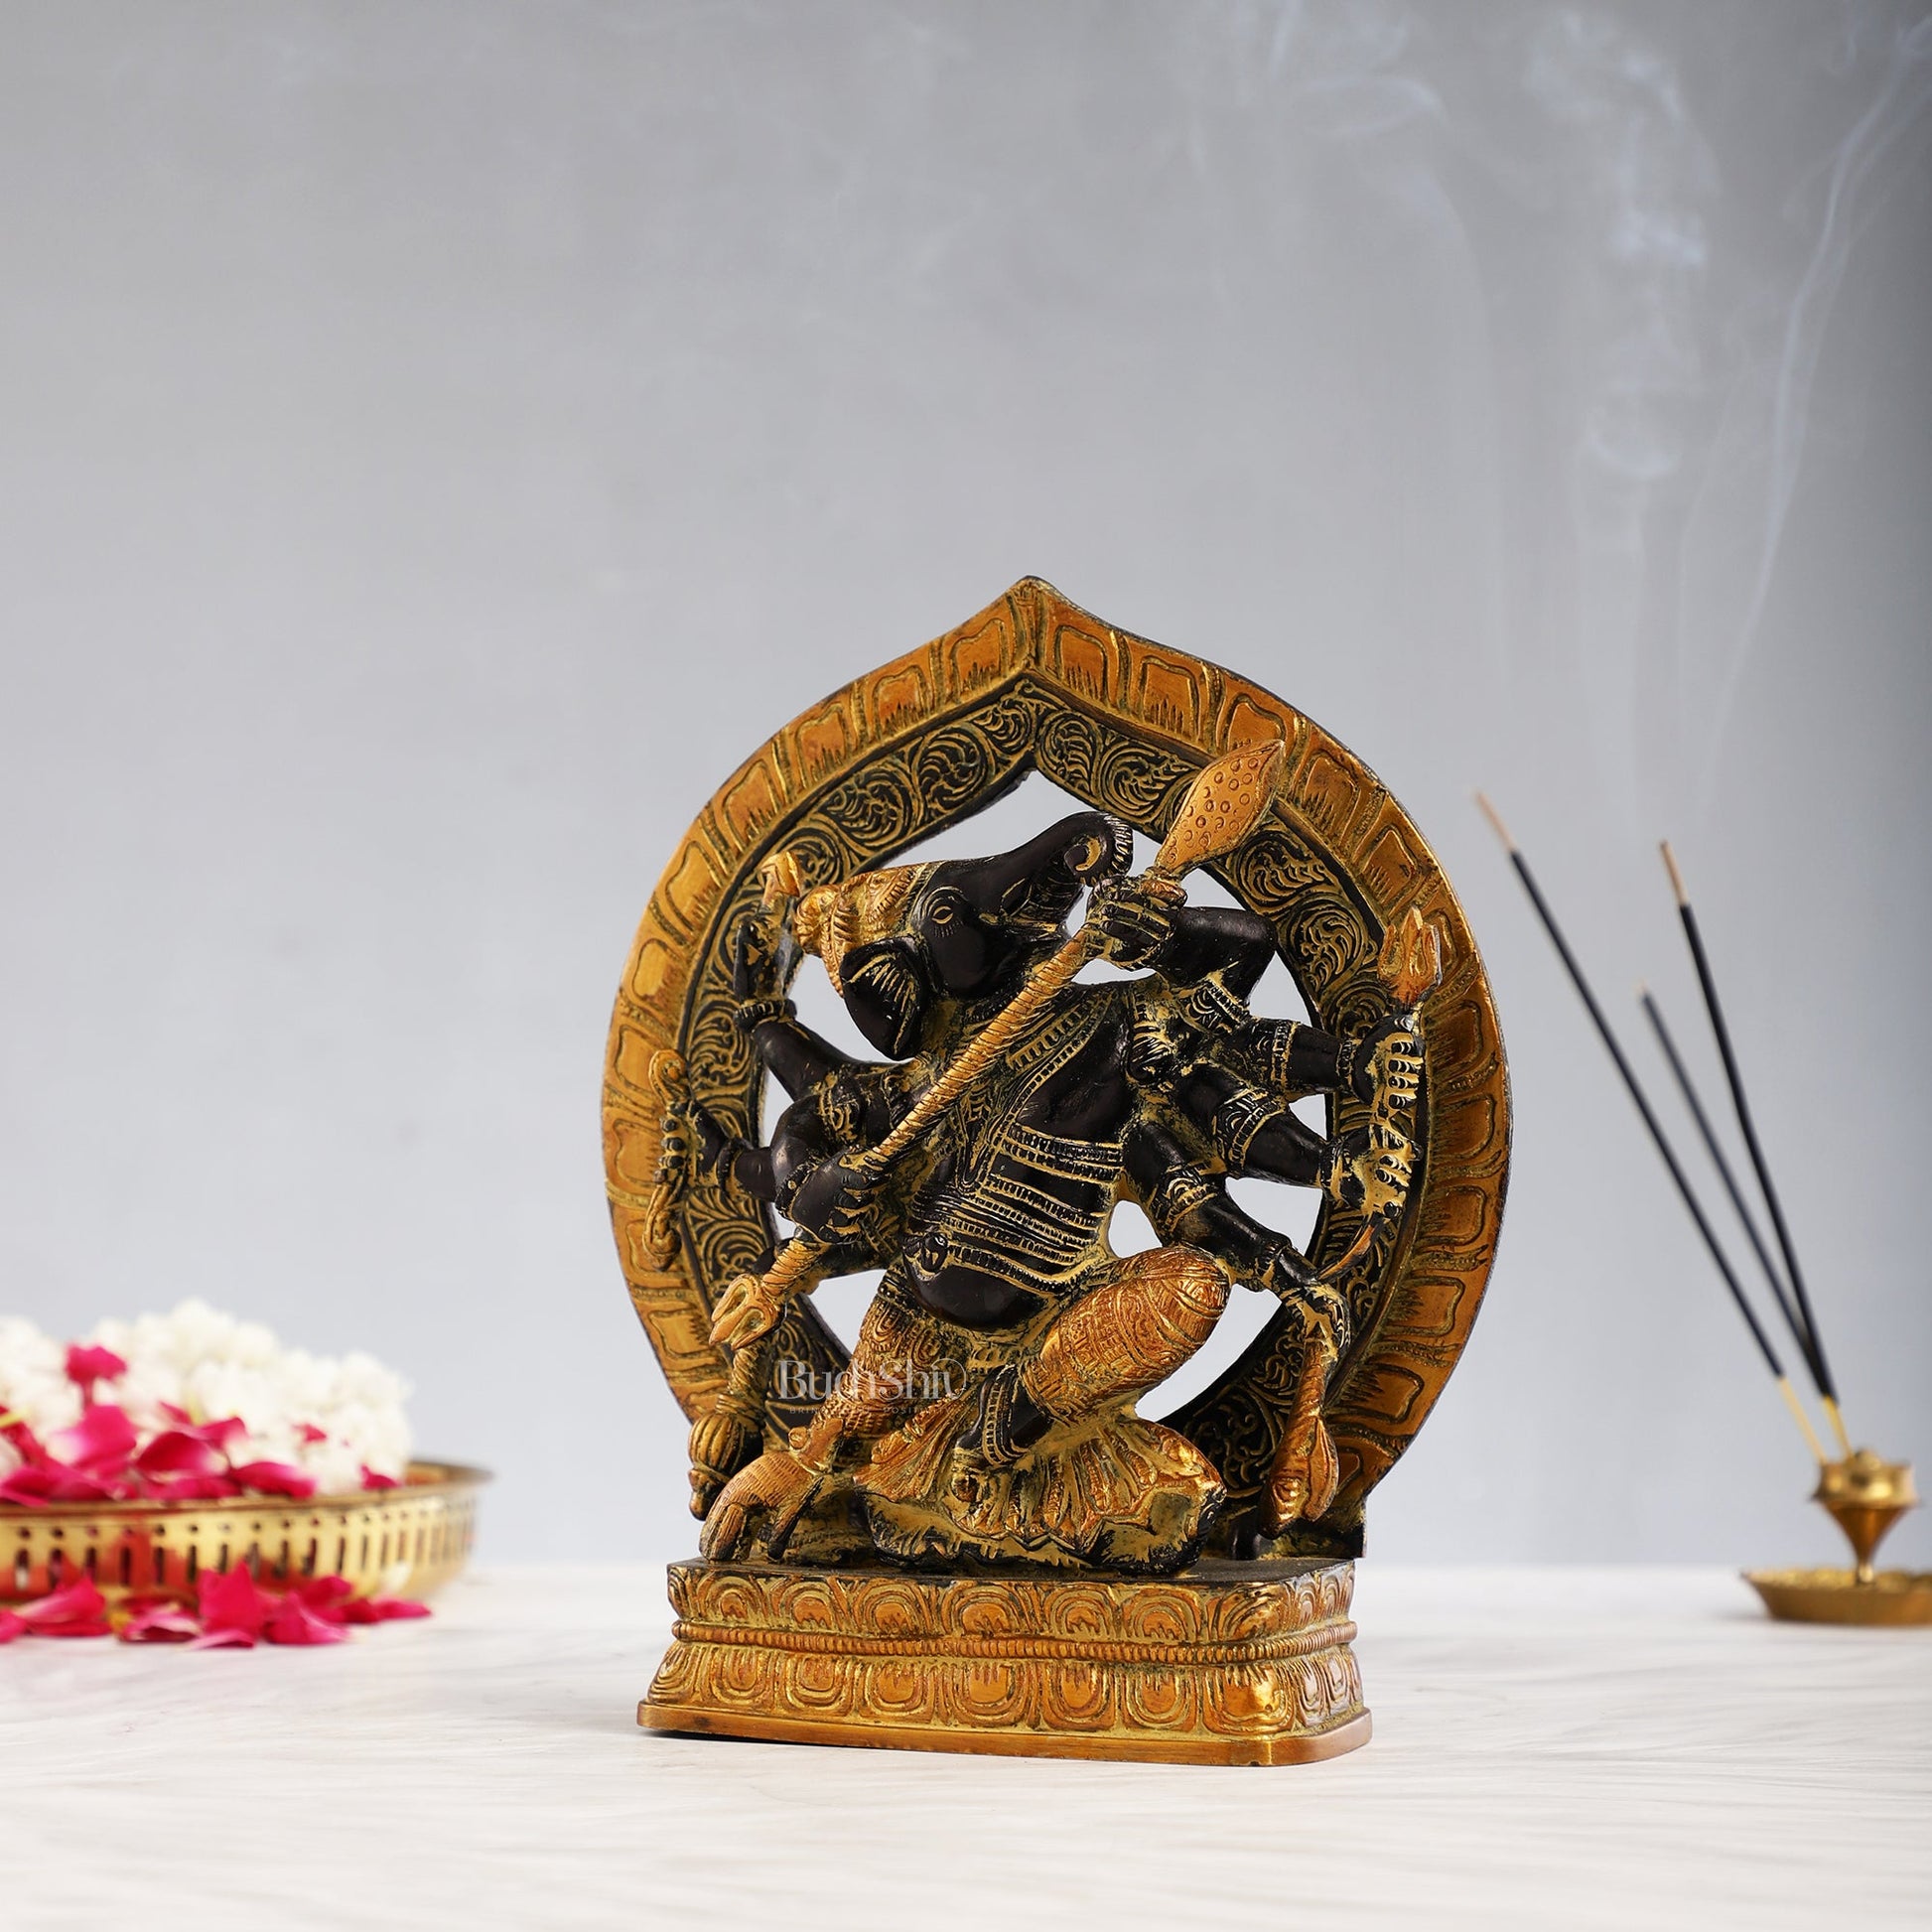 Unique Antique Brass Lord Ganesha Statue with 8 Arms 9 inch - Budhshiv.com